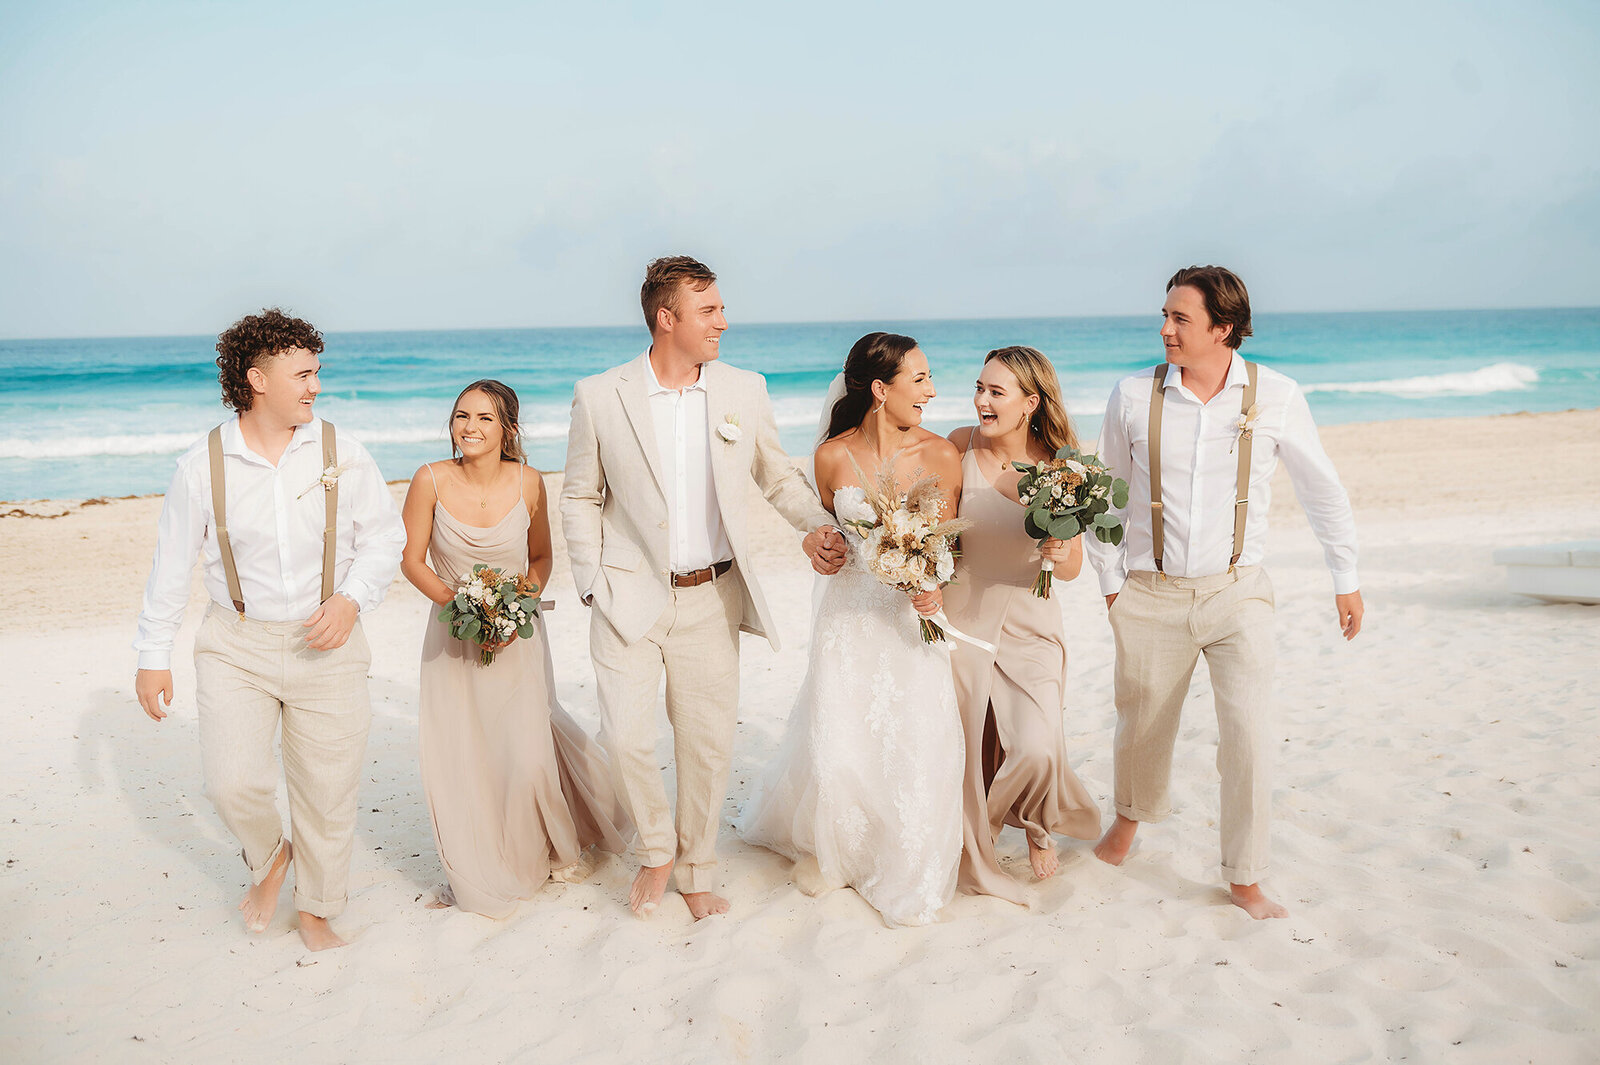 Bridal Party walks along the beach in Cancun Mexico.